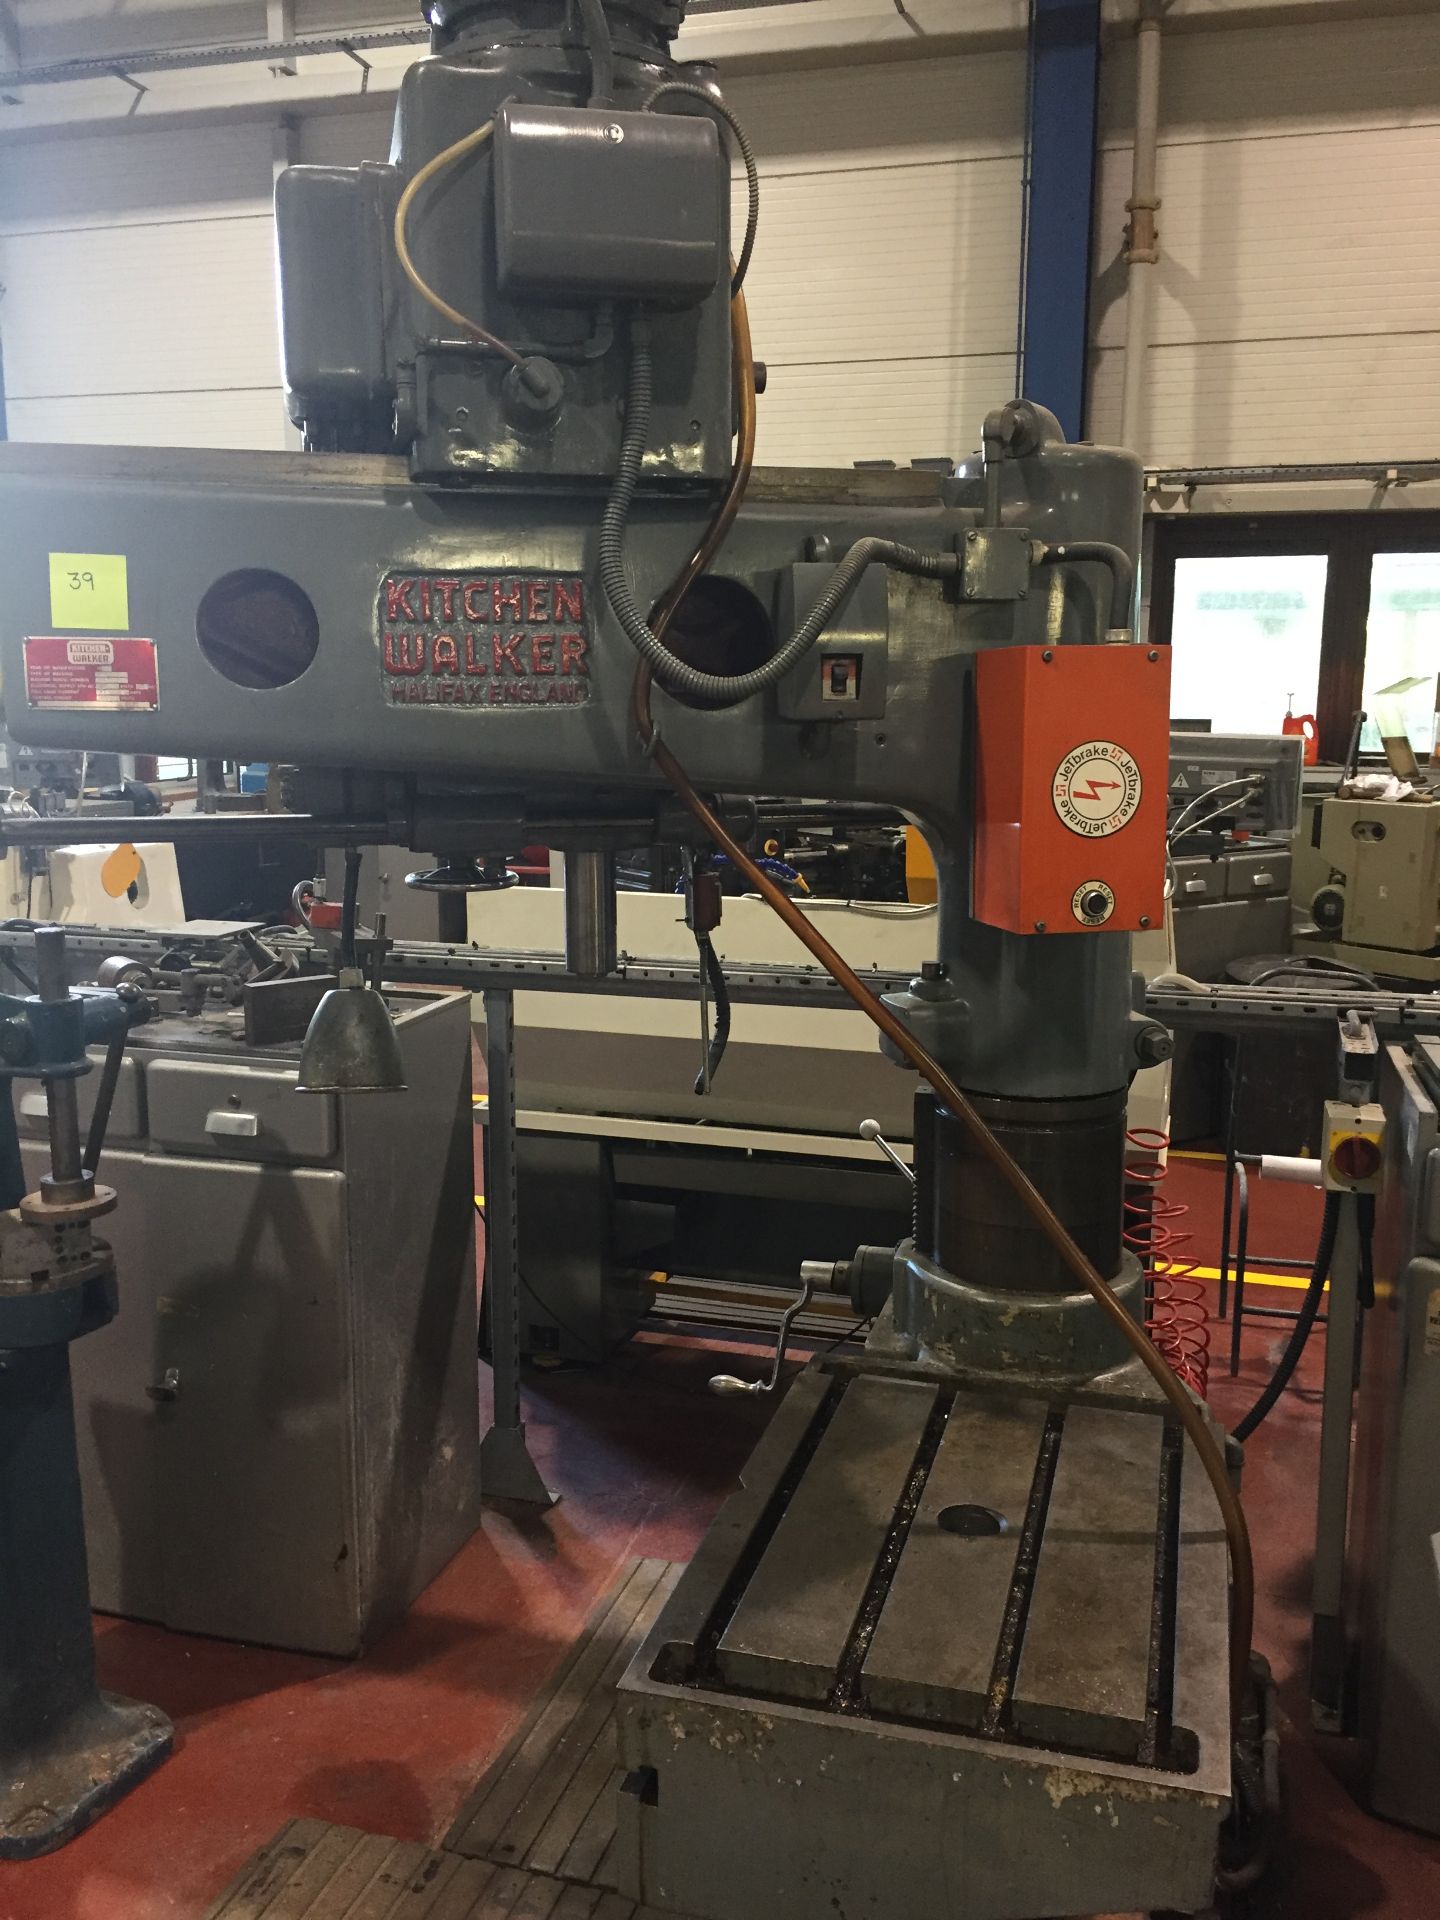 KITCHEN & WALKER 38" T-2 RADIAL ARM DRILL WITH BOX TABLE. SN 3469 (1982). - Image 2 of 3